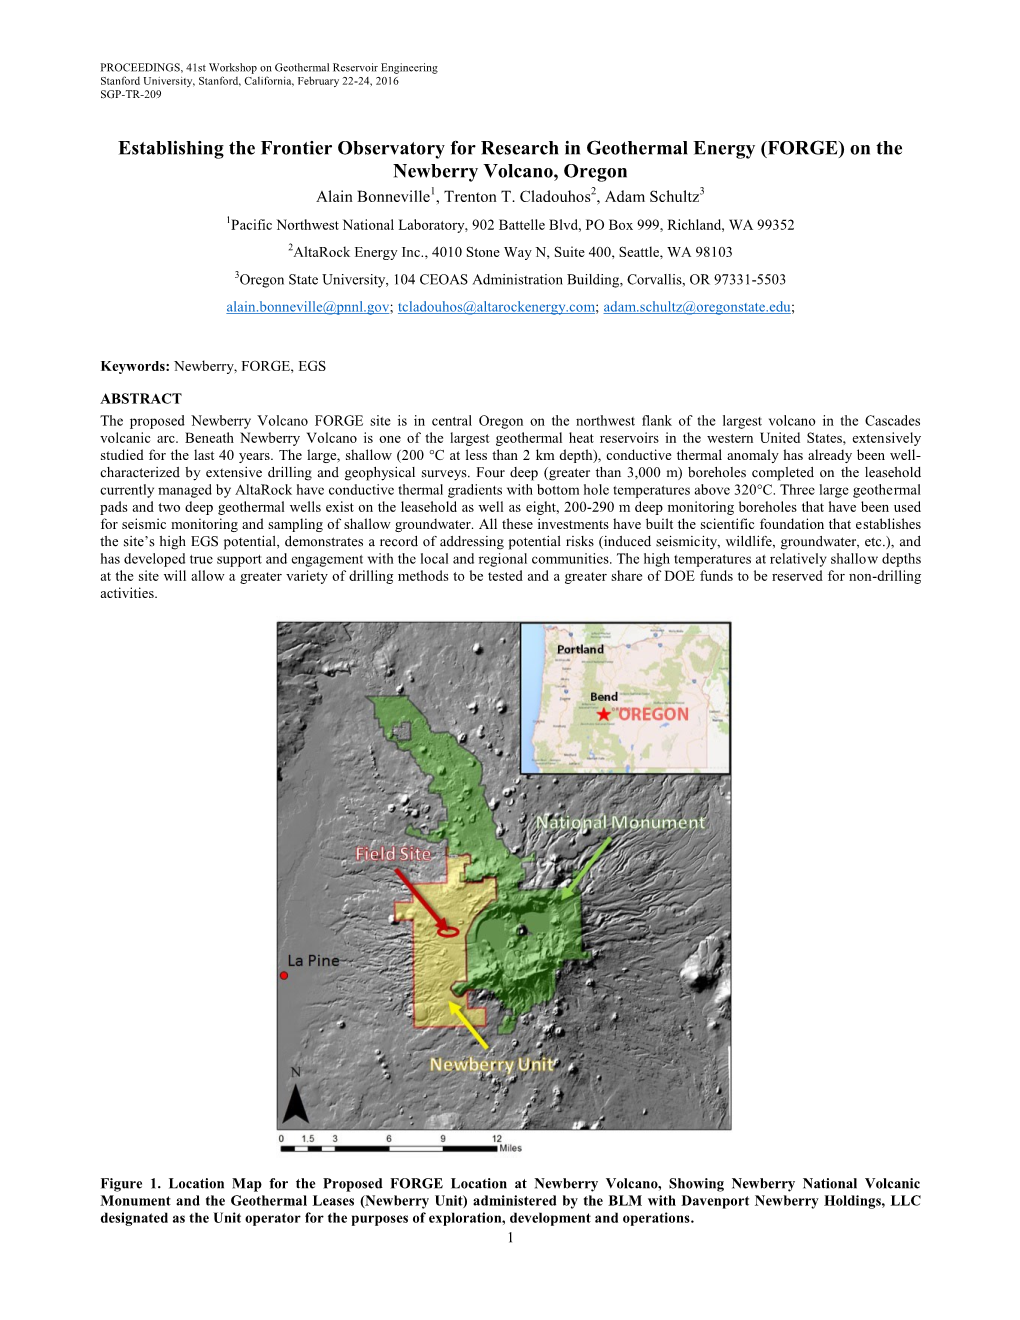 Establishing the Frontier Observatory for Research in Geothermal Energy (FORGE) on the Newberry Volcano, Oregon Alain Bonneville1, Trenton T